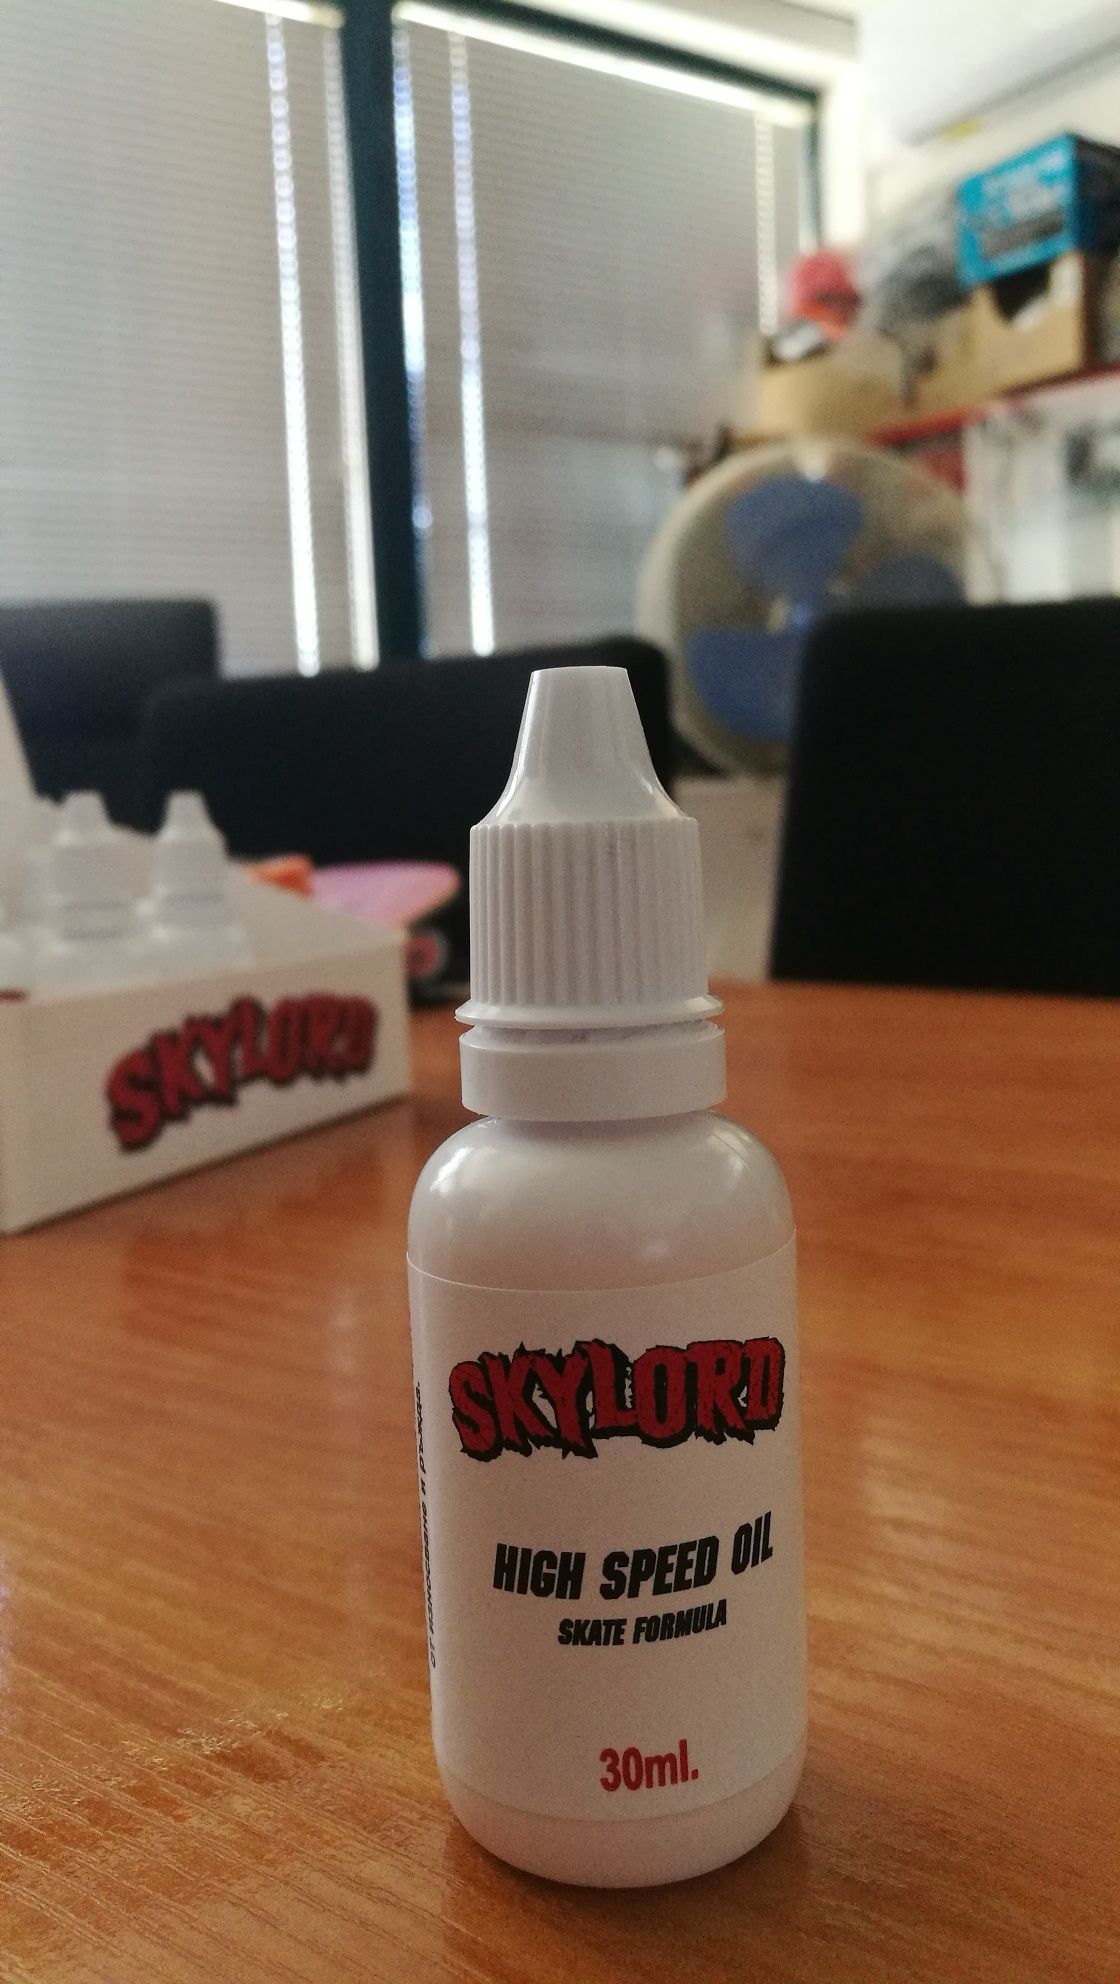 Skylord  high speed oil смазка, масло за лагери за скейтборд и ролери